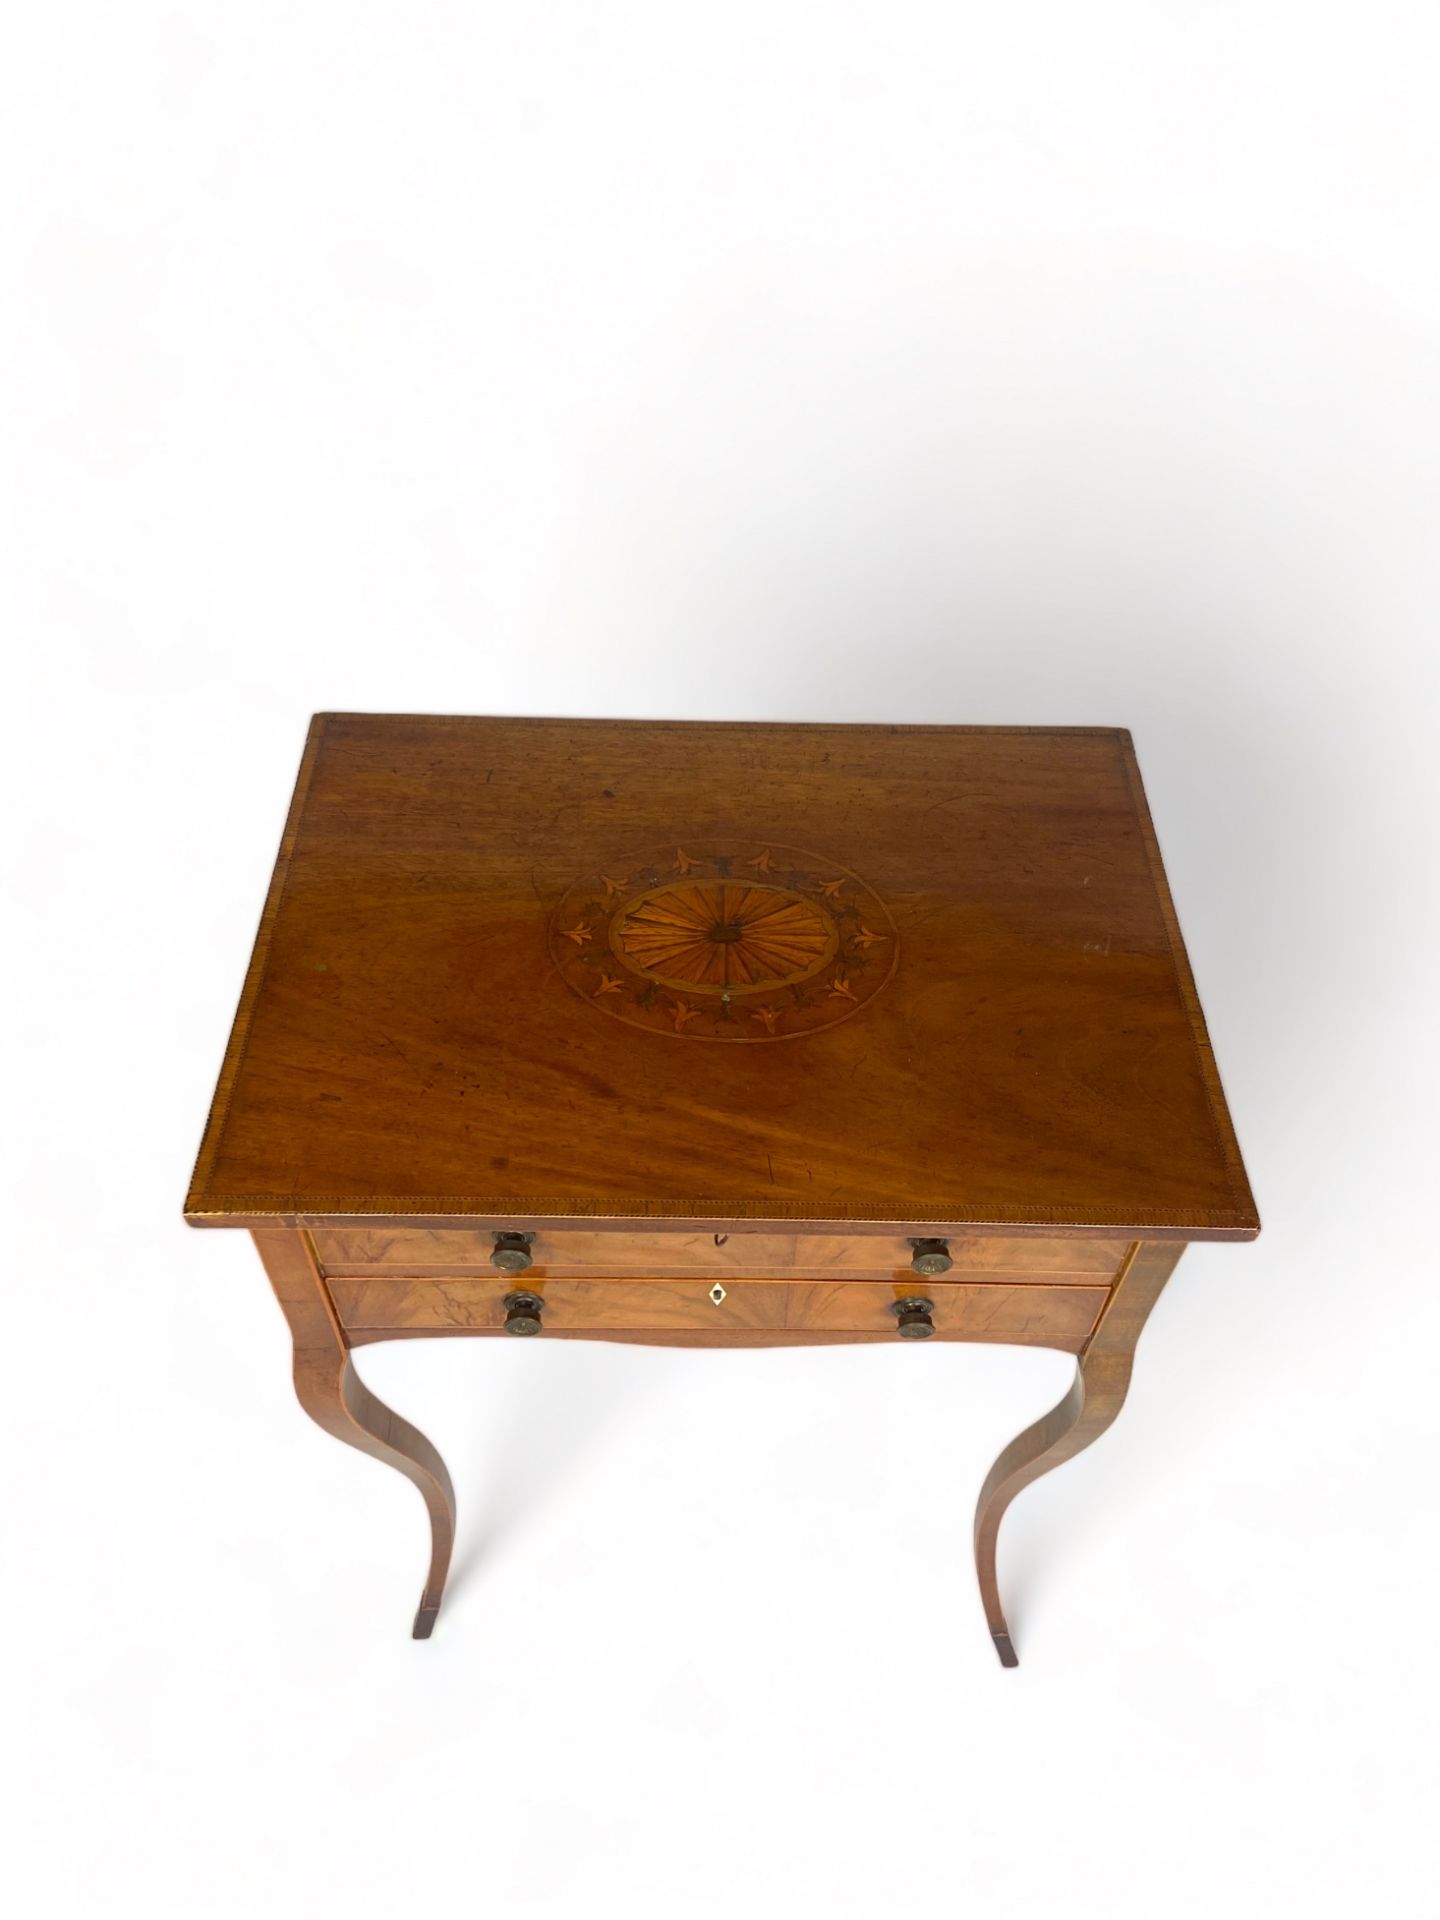 A George III mahogany and tulipwood banded and chequerbanded marquetry work table - Image 6 of 11